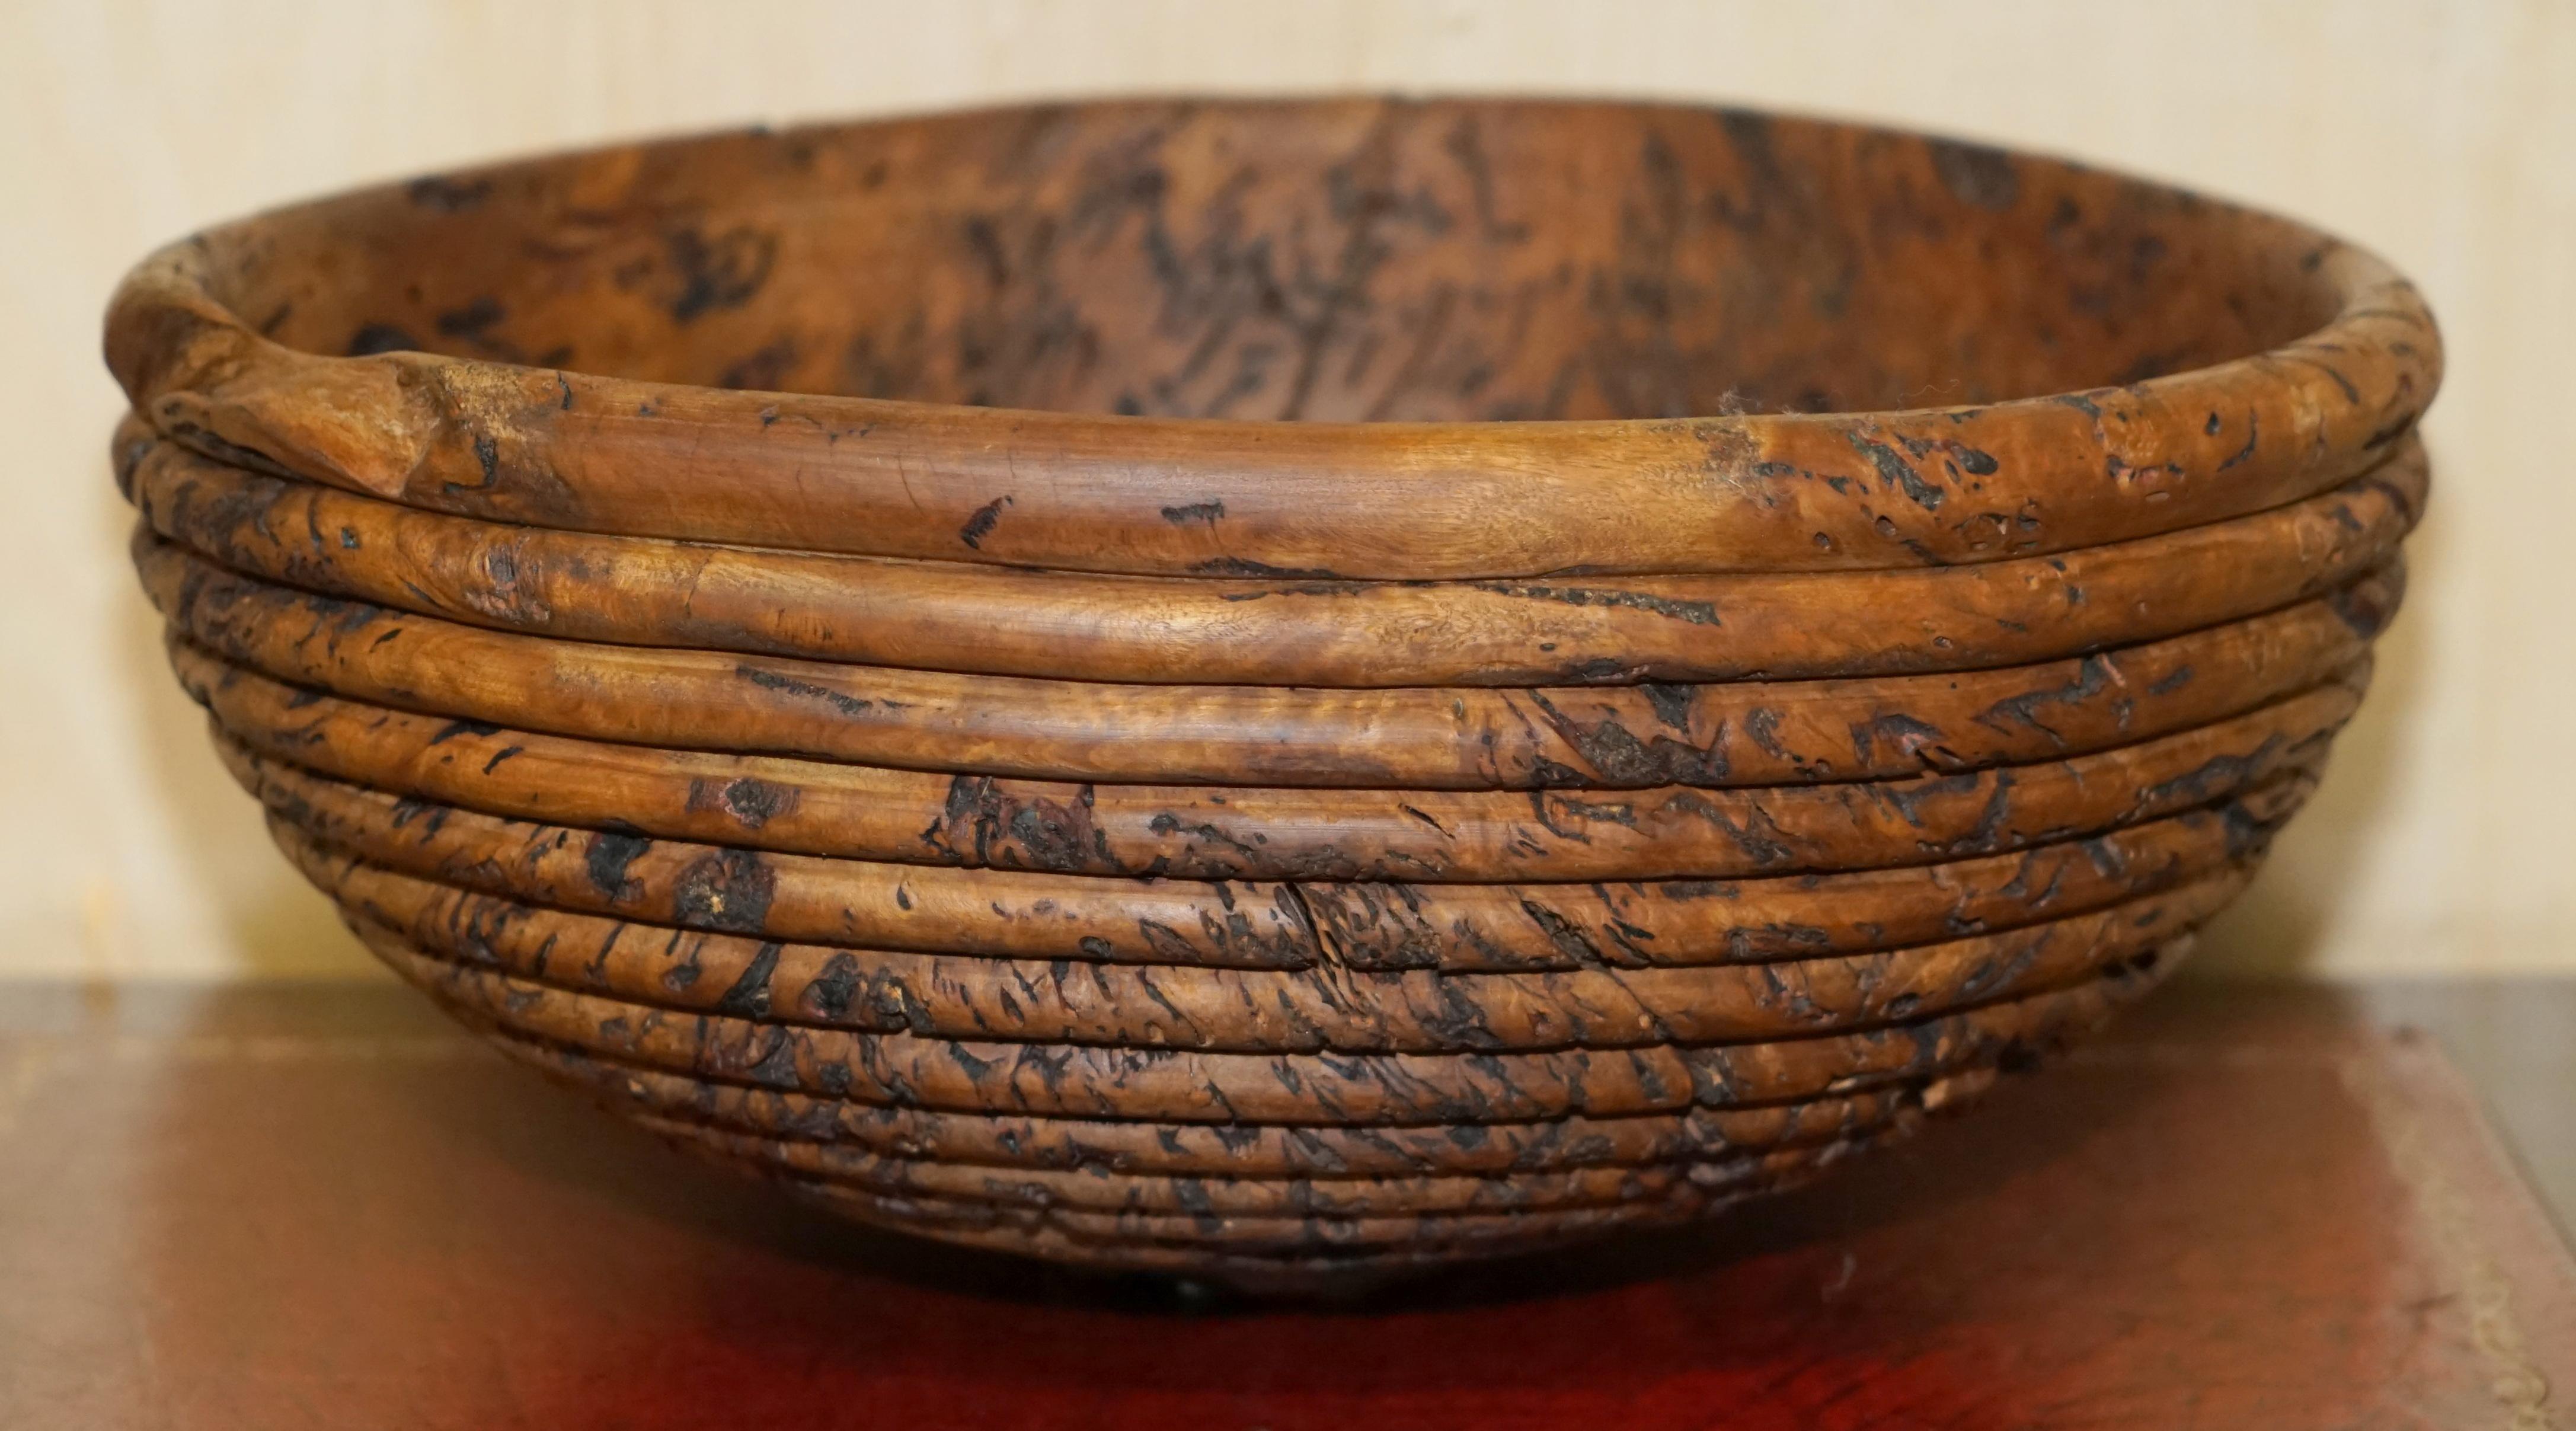 EXTRA LARGE HEAVILY BURRED EUCALYPTUS BOWL SIGNED B MOSS FOR FRUiT ETC MUST SEE For Sale 4